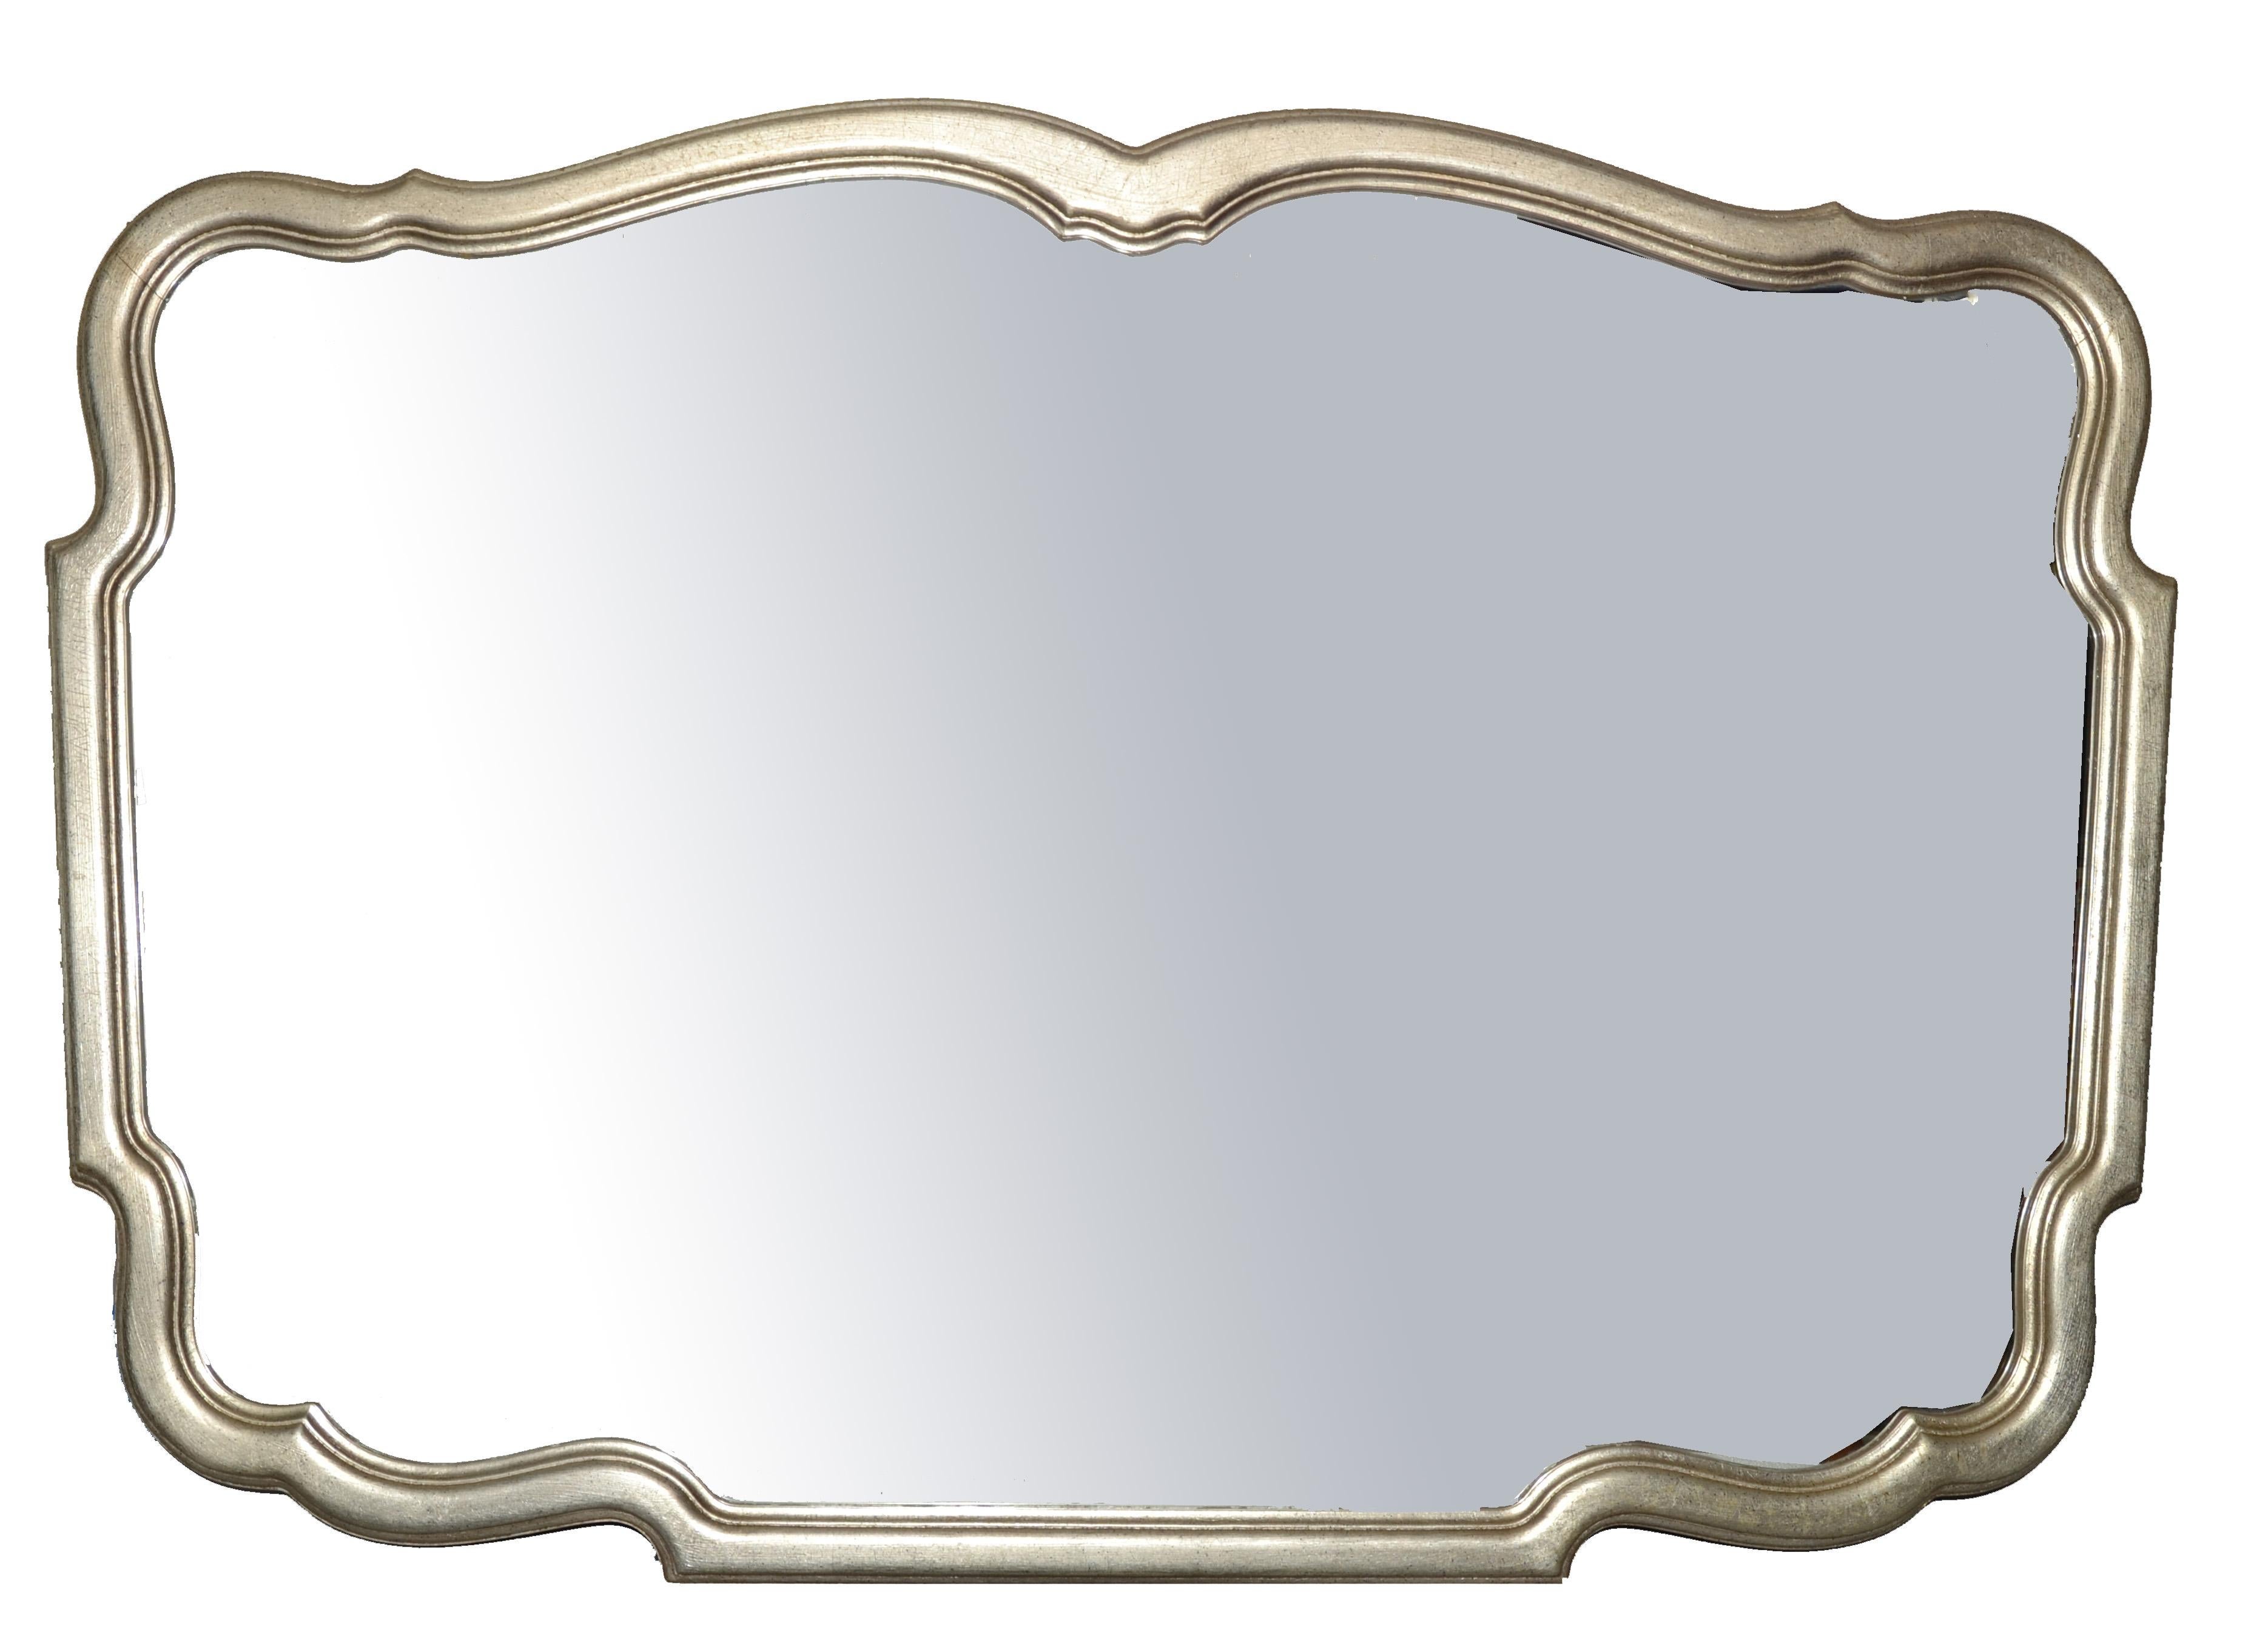 Large Wood Curved French Provincial Silver Gold Finish Wall Mirror by Karges. USA 1970s.